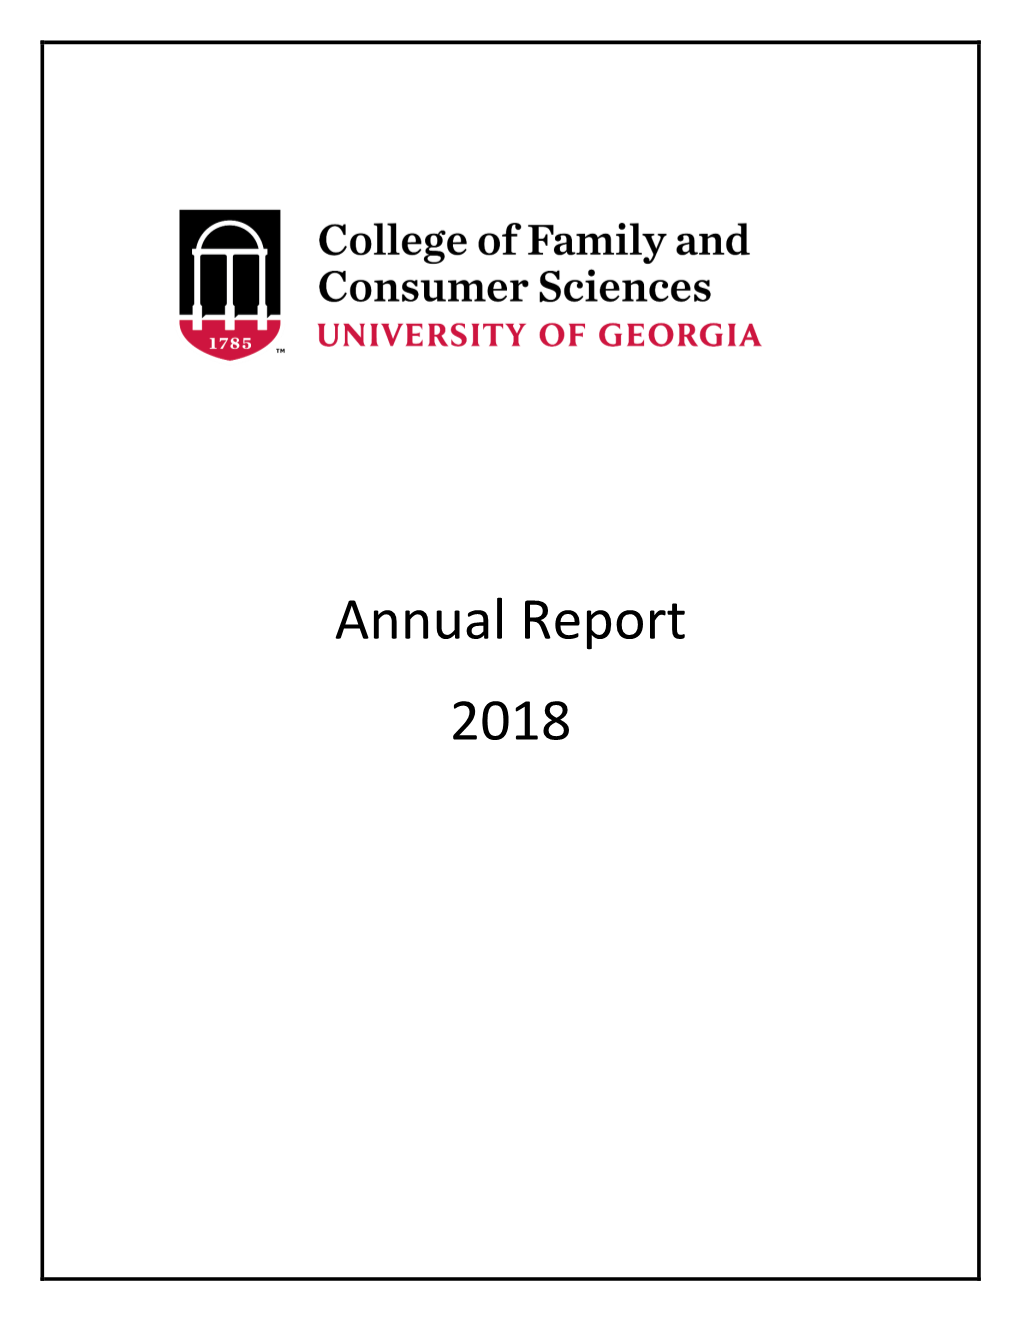 Annual Report 2018 Table of Contents